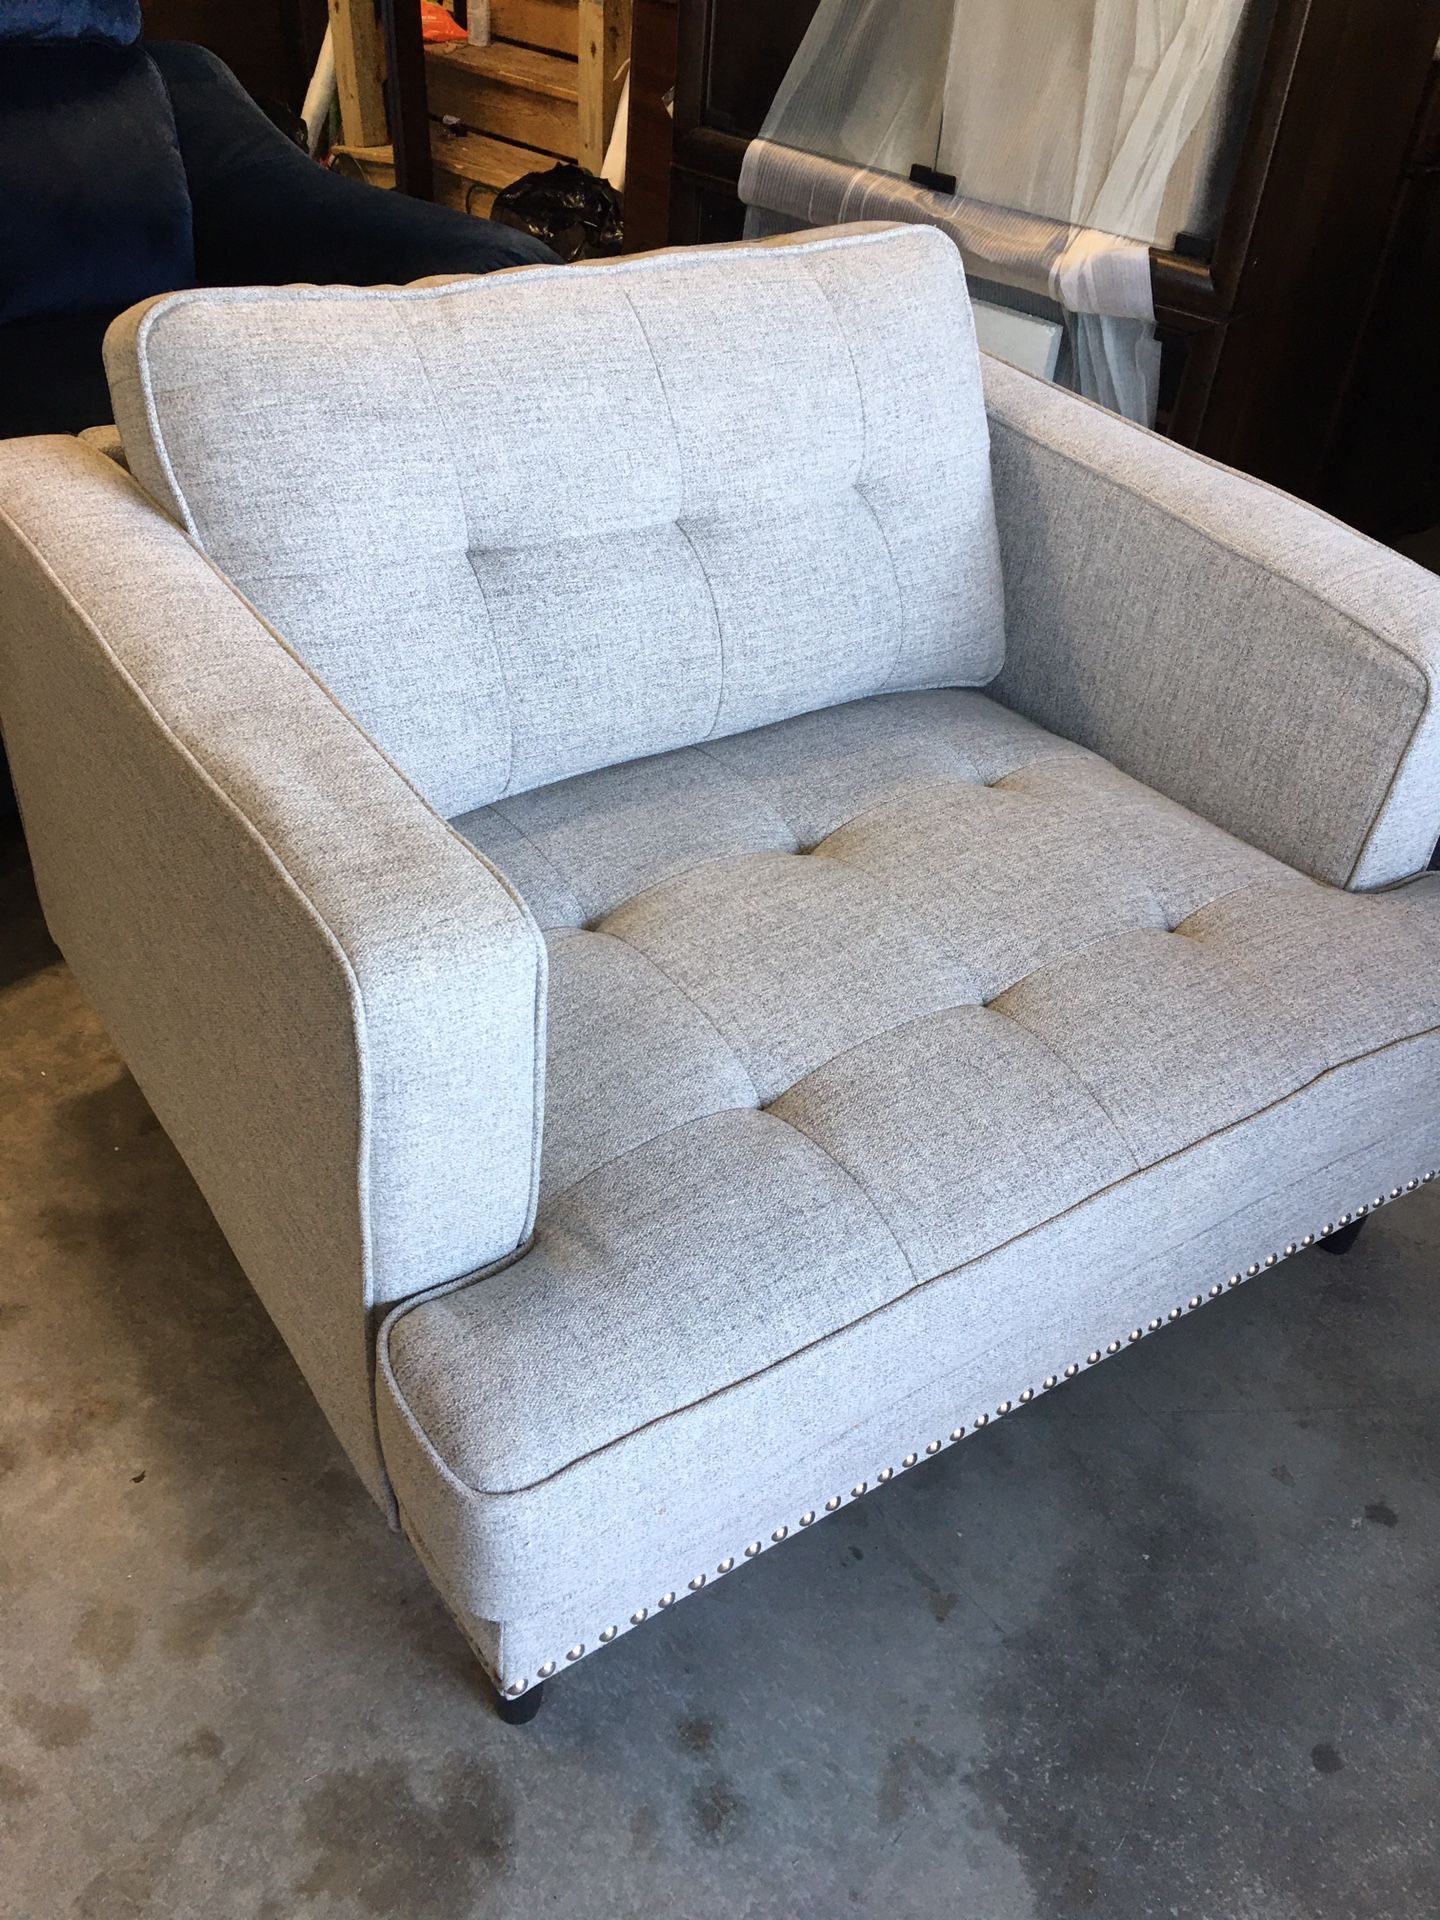 Brand new Lifestyle Tufted Oversized Platinum Chair